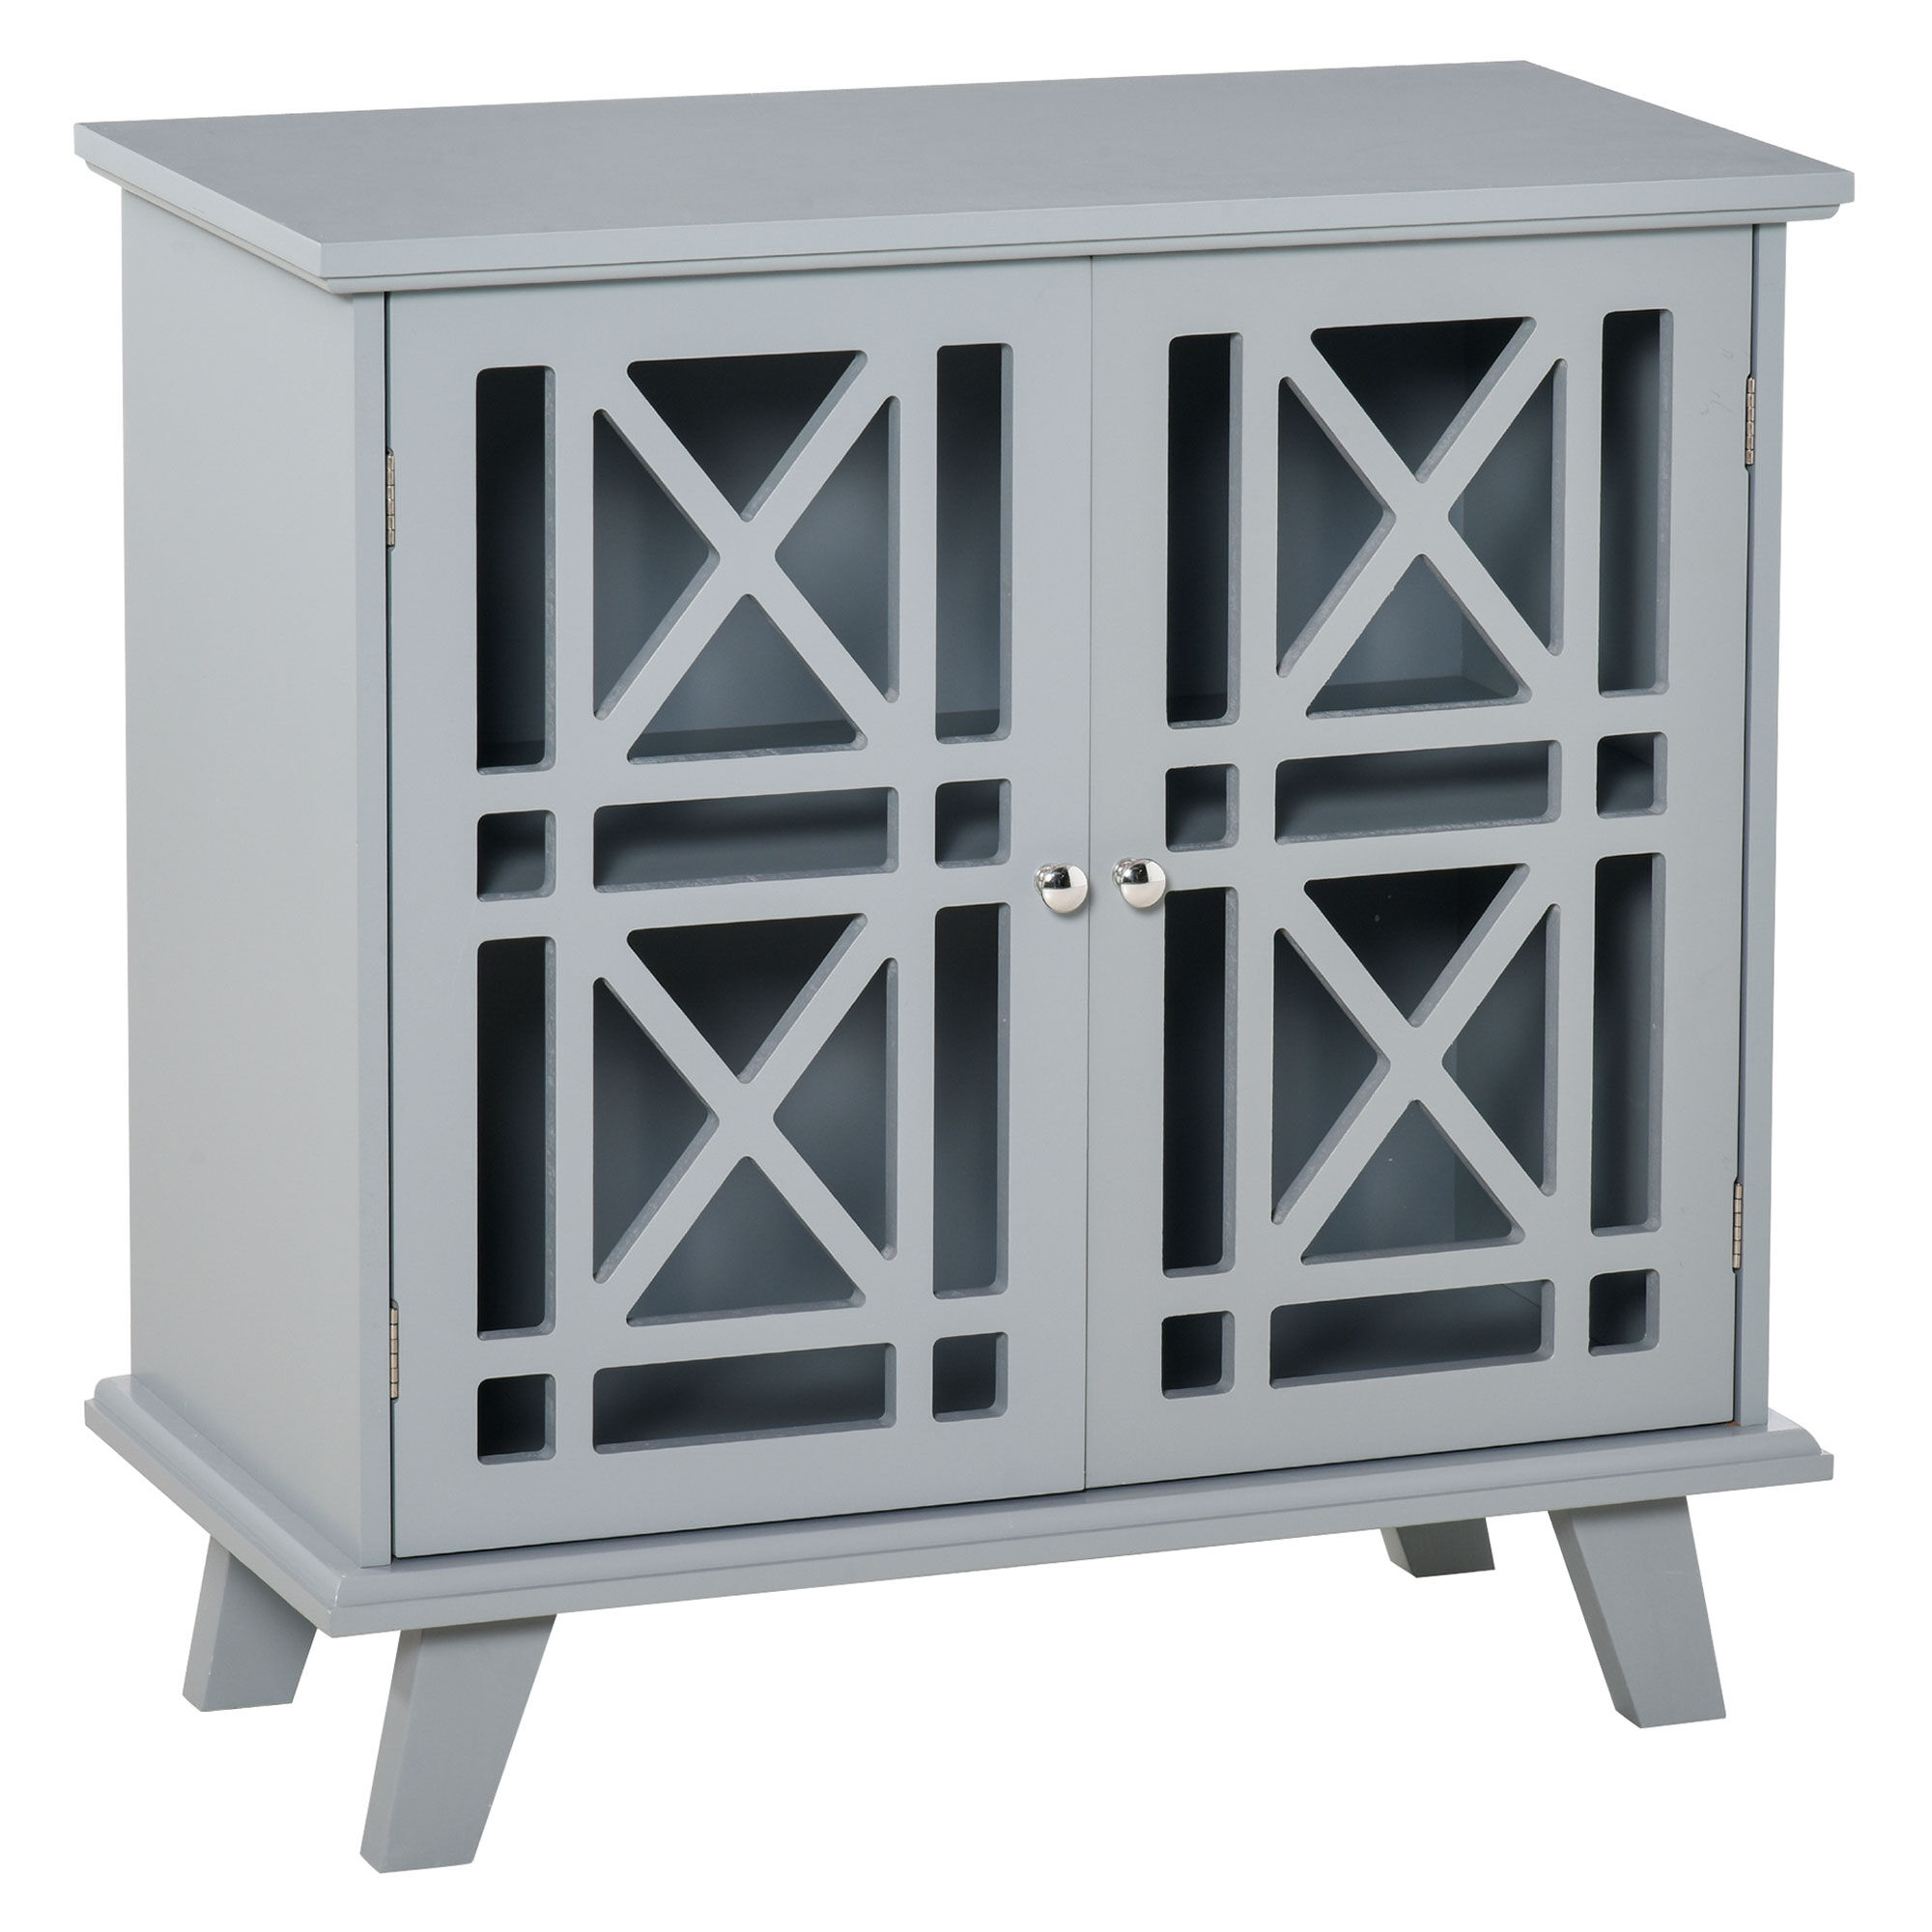 HOMCOM Accent Storage Cabinet Gray Sideboard Buffet Console with Fretwork Doors for Kitchen Dining Living Room Entryway   Aosom.com